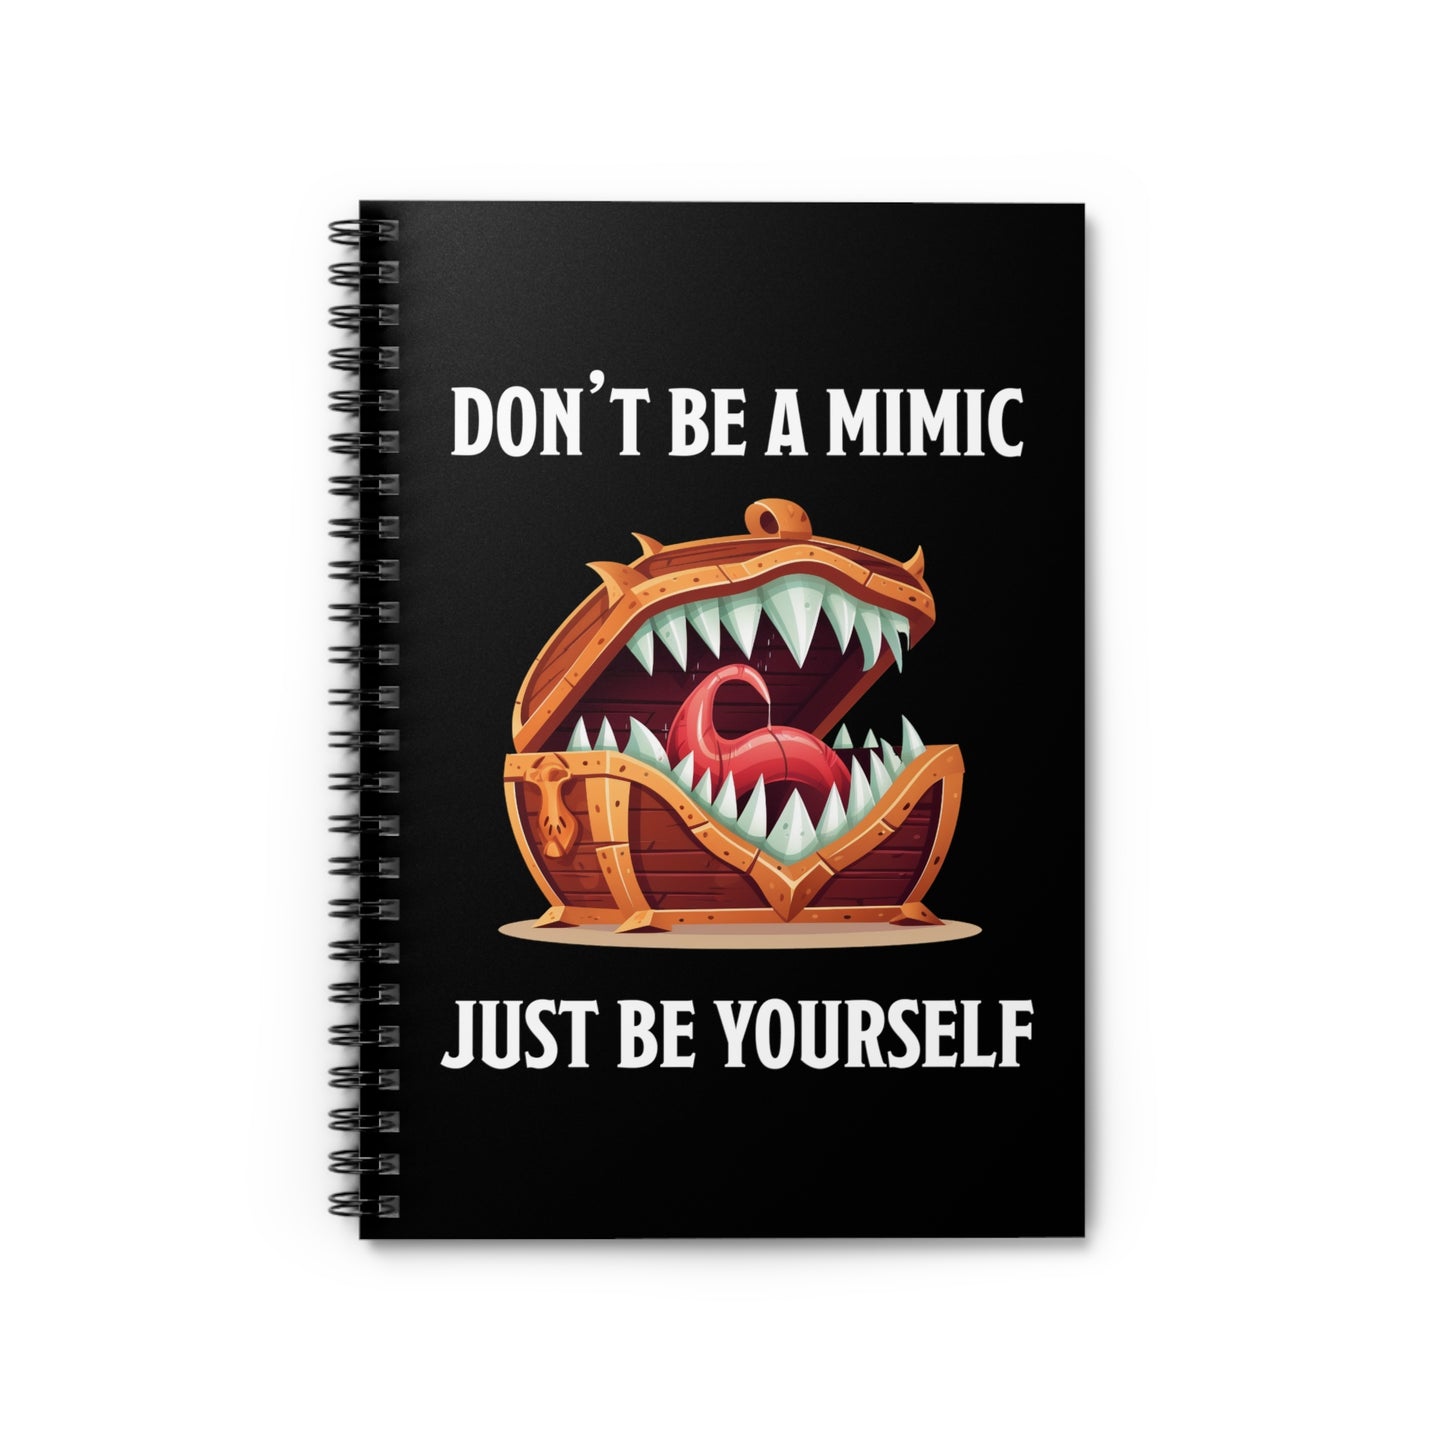 DnD Campaign Journal, Don't Be A Mimic, Just Be Yourself Spiral Notebook, Ruled, Tabletop Gaming D&D Character Notepad, Pathfinder Journal